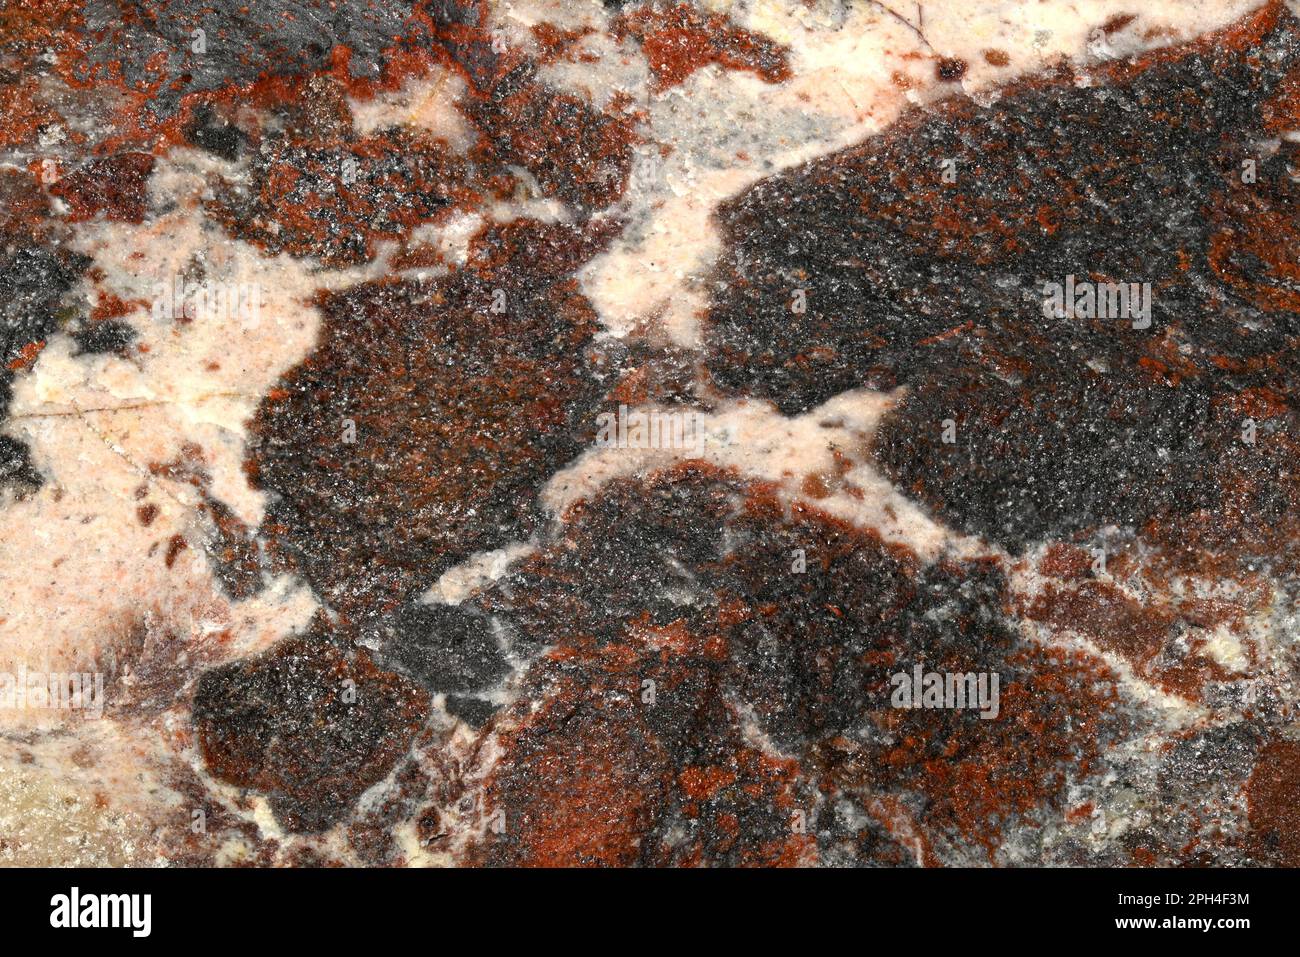 Breccia (South Africa) Sedimentary rock composed of broken fragments of minerals or rock cemented together by a fine-grained matrix. Closeup - image f Stock Photo